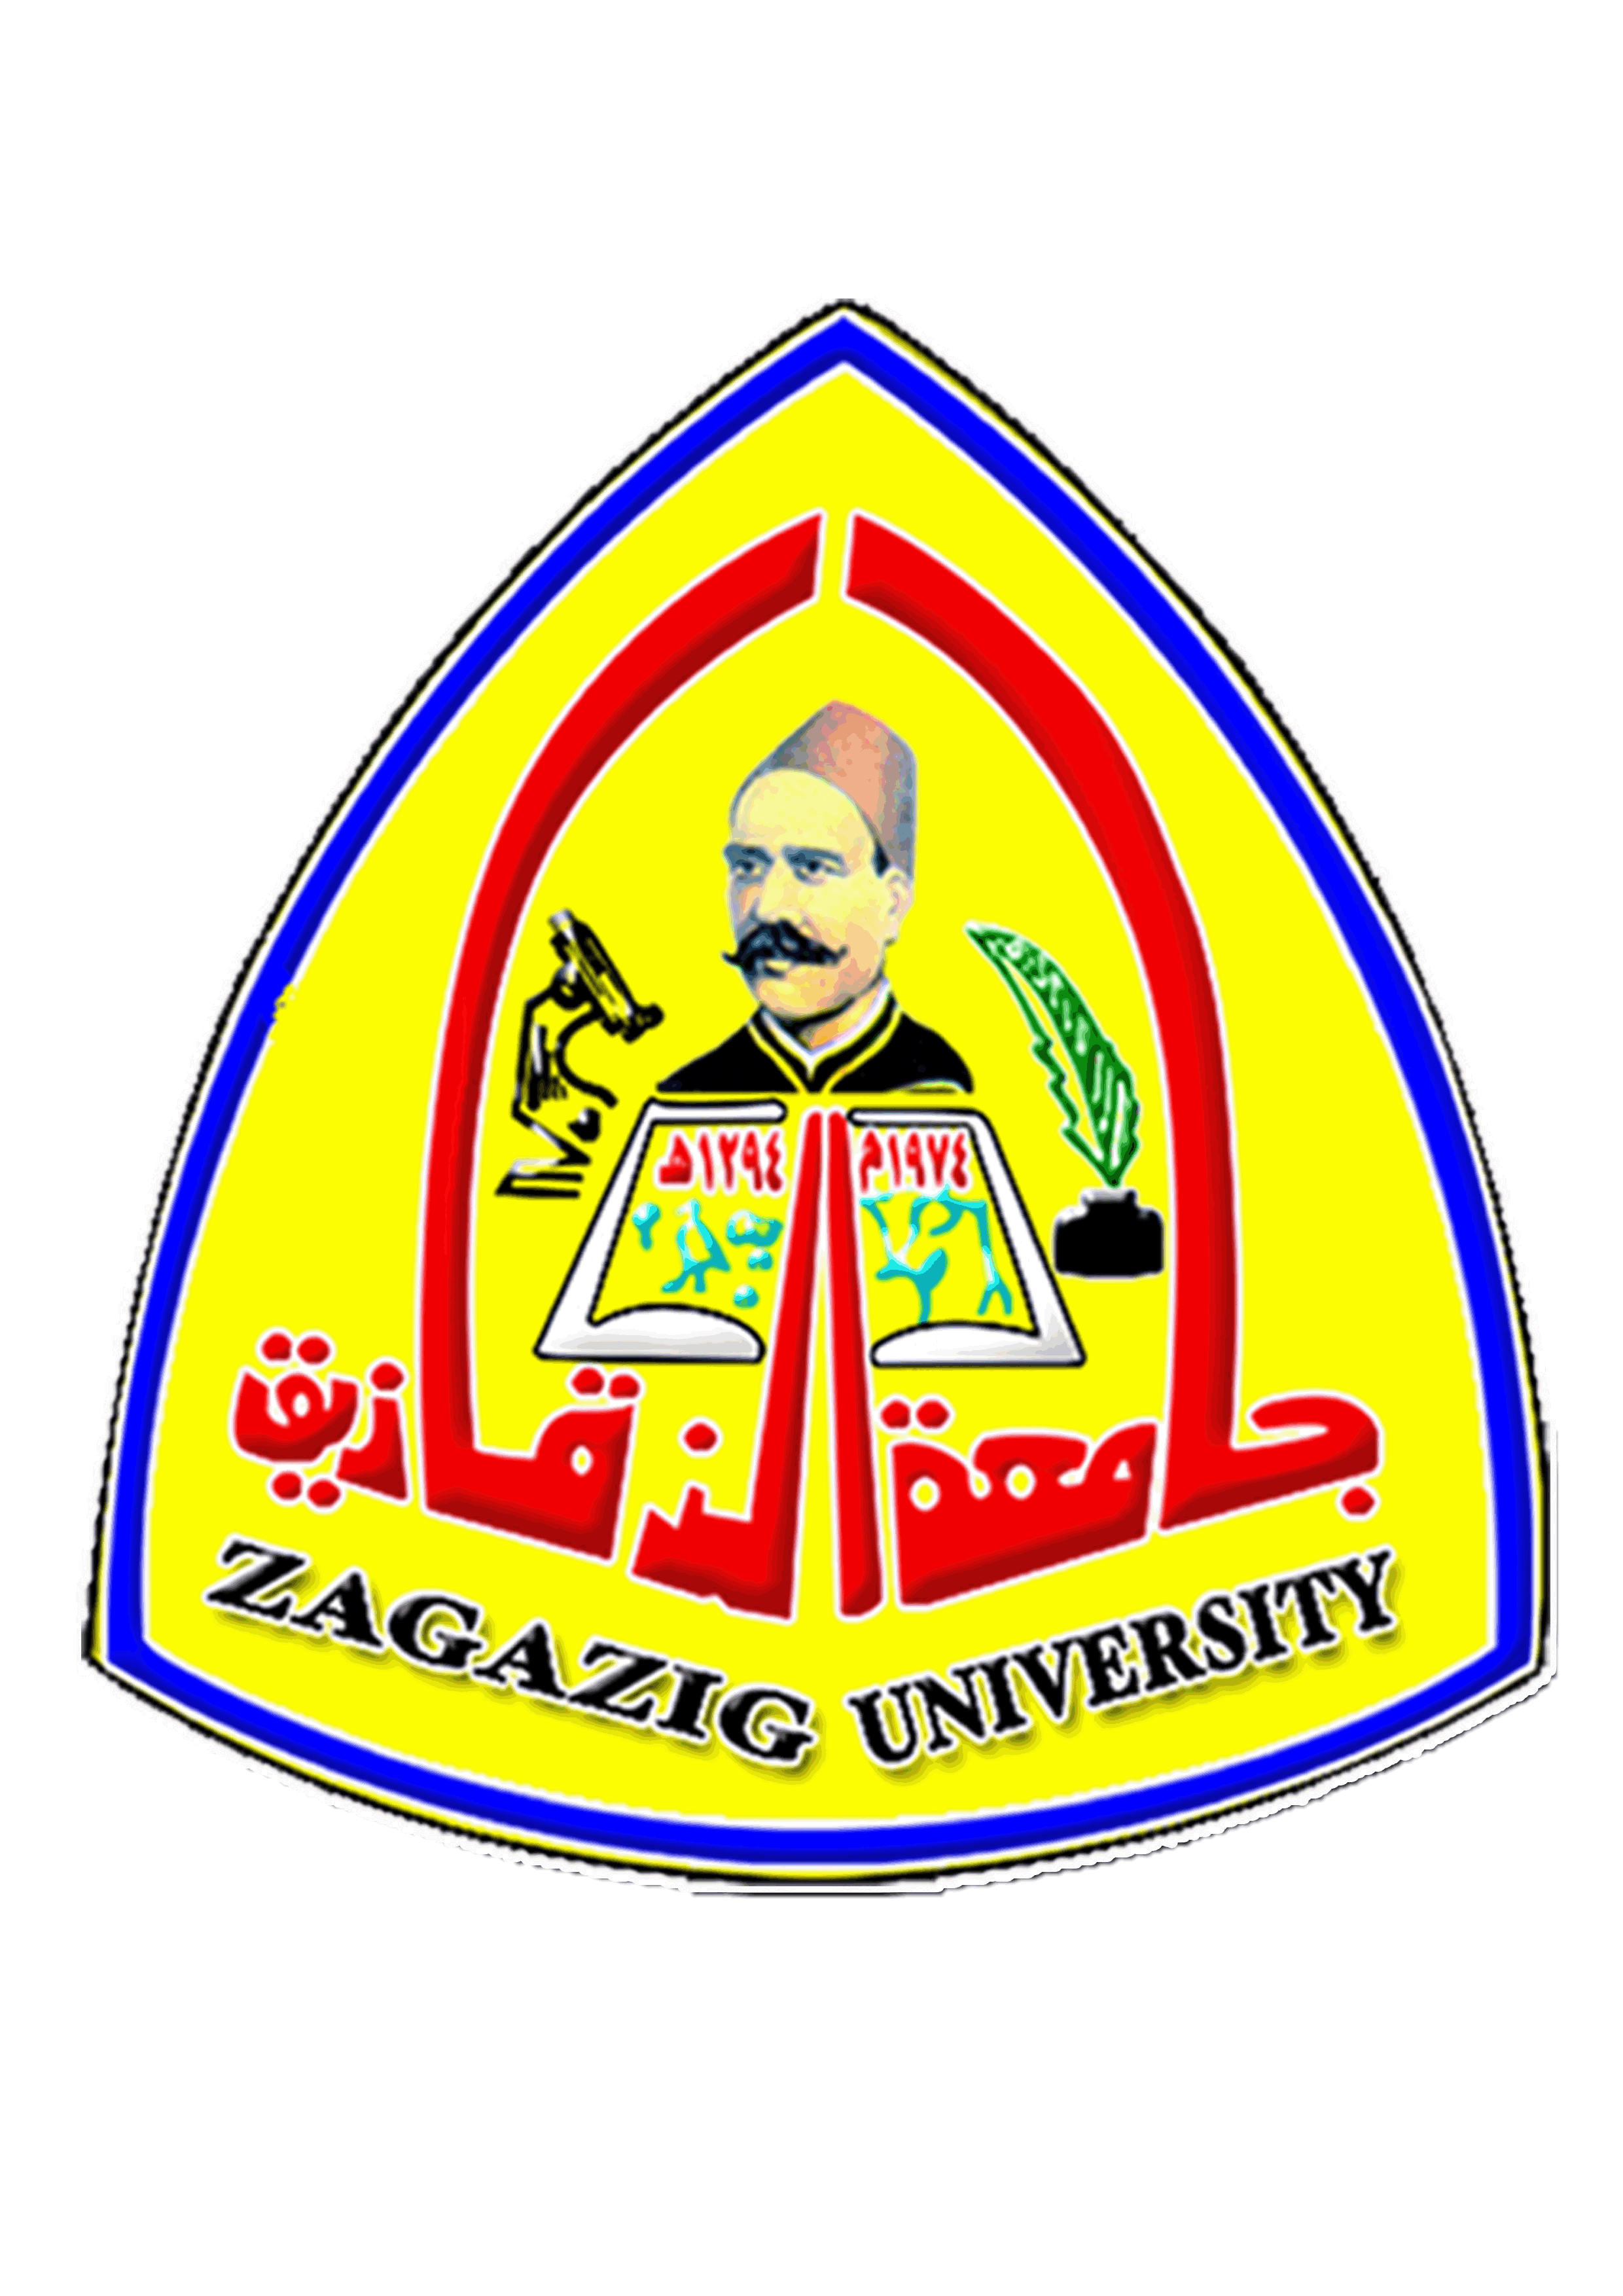 Matmrastrutejiat meet the challenges of education and scientific research sessions continue for a second day at the University of Zagazig